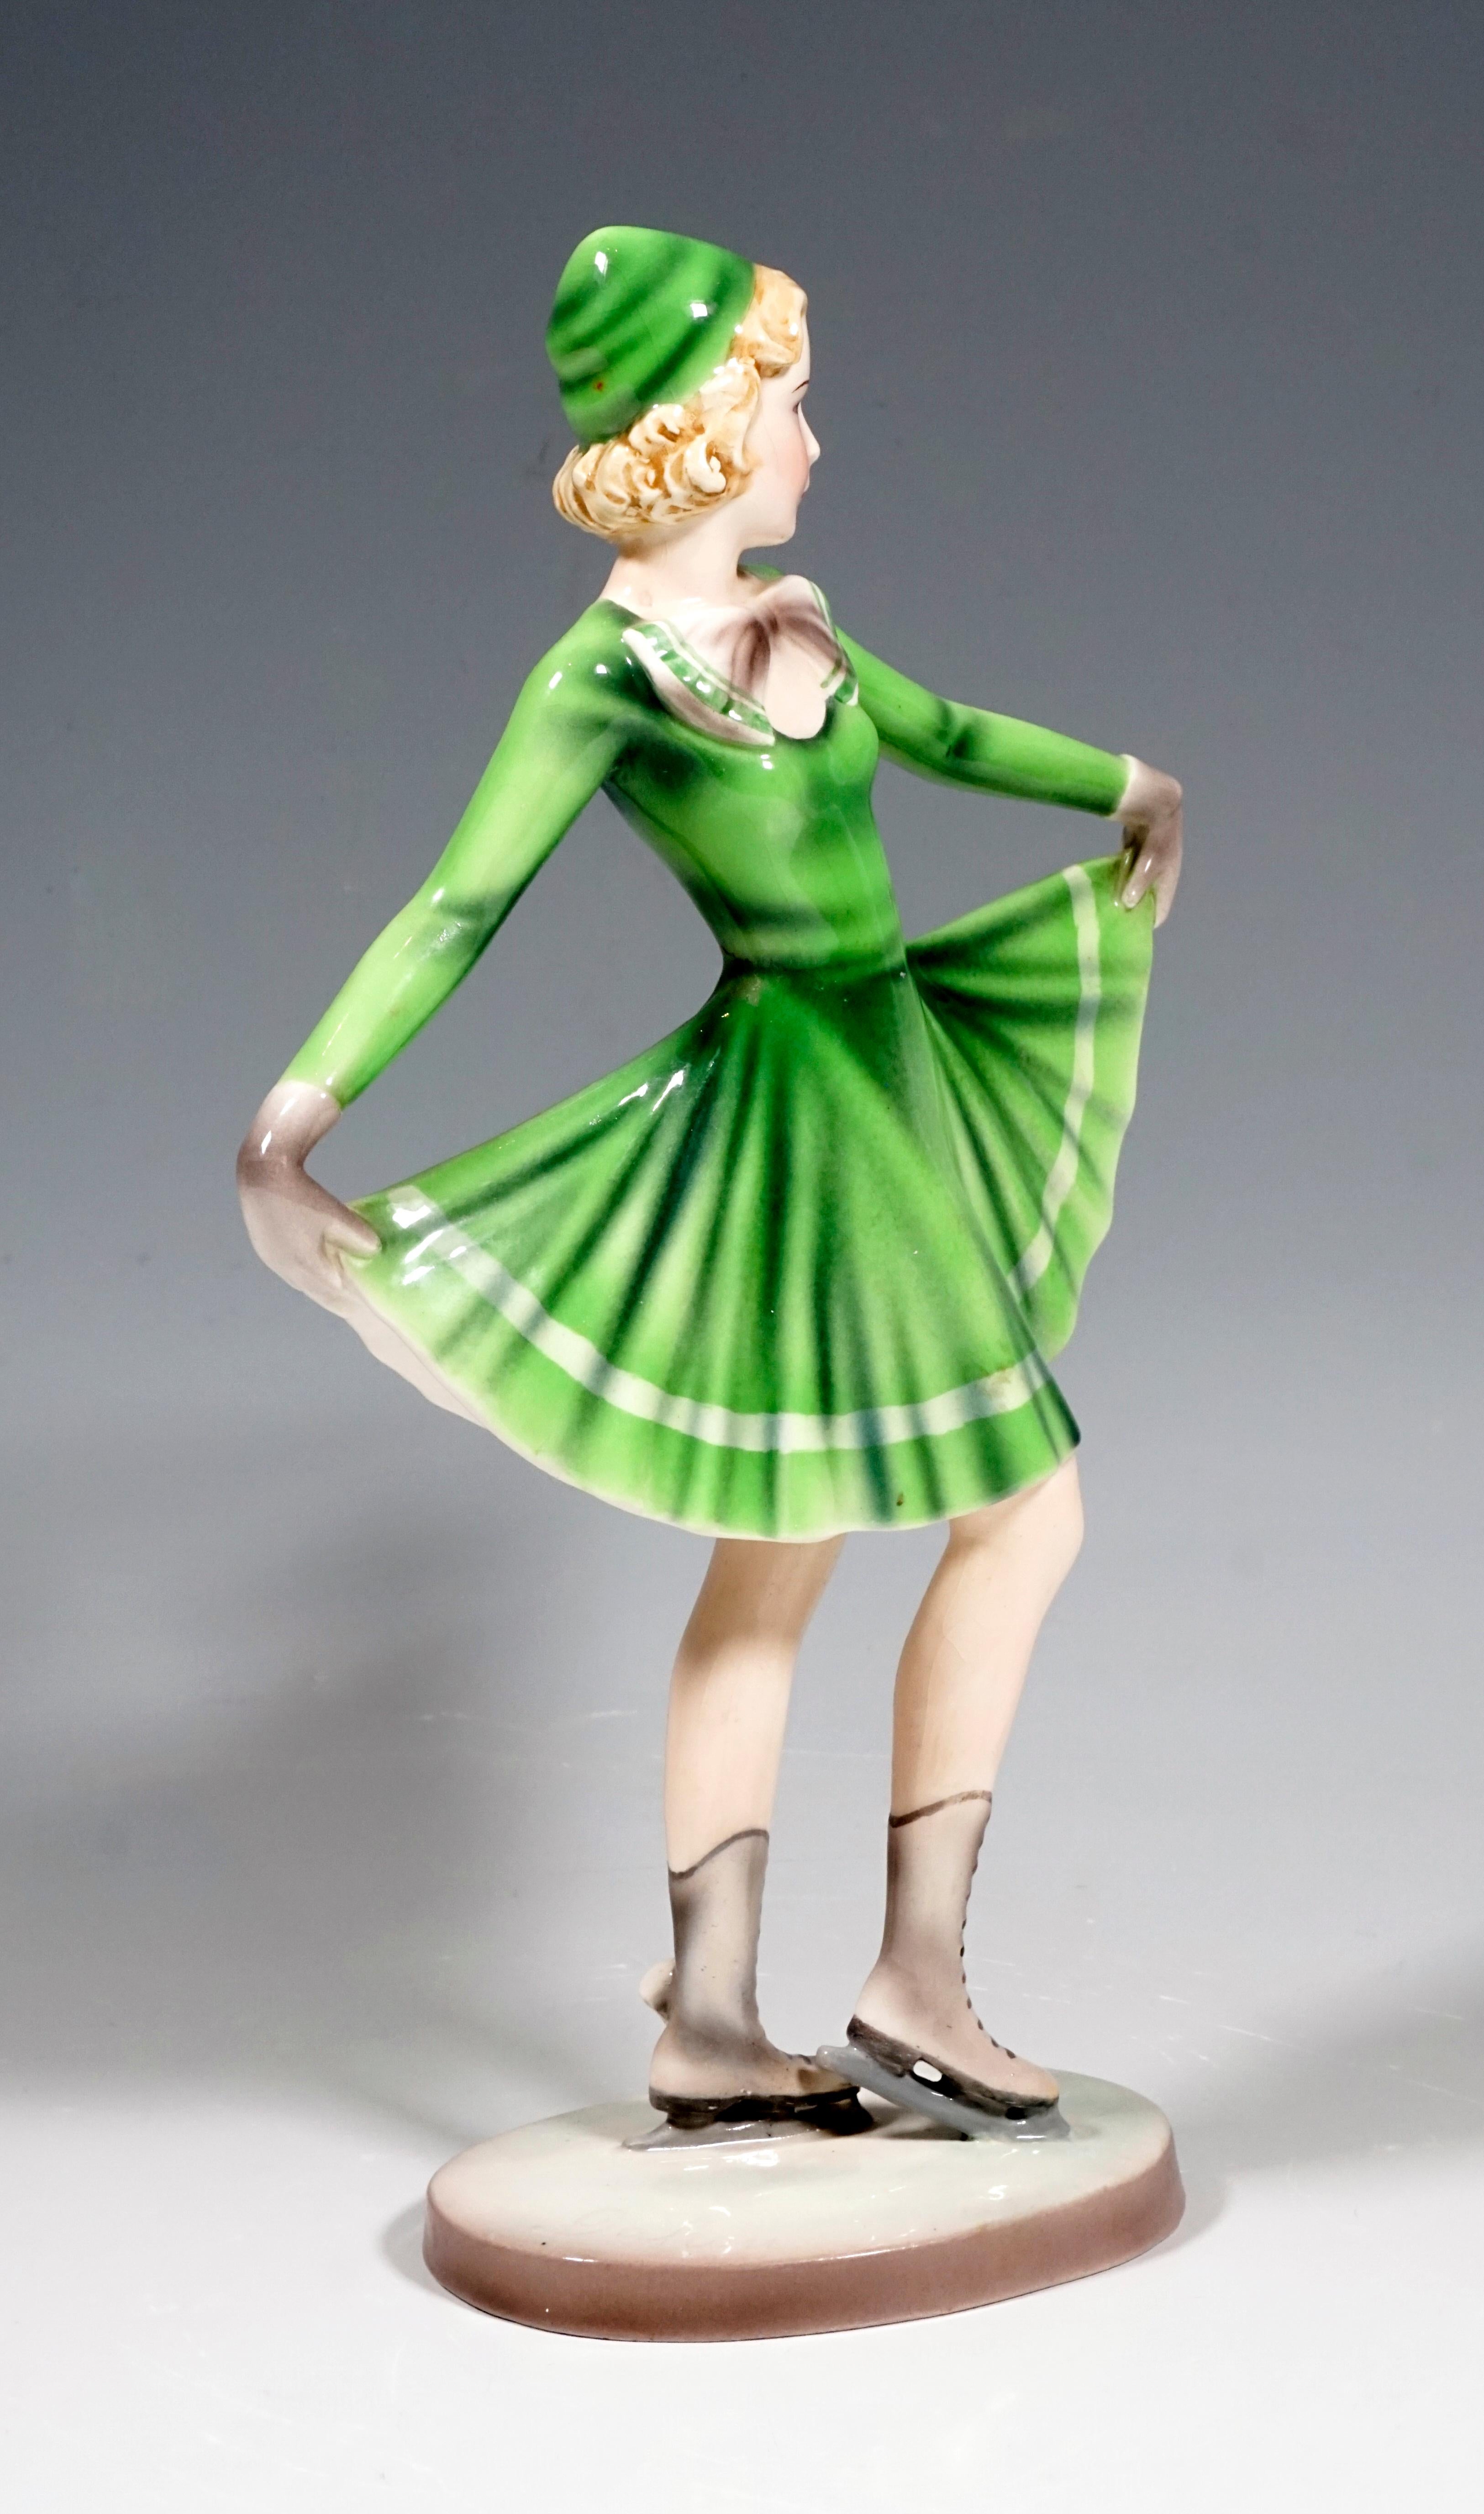 Very rare Goldscheider Vienna Art Deco Figurine of the 1930s.
Standing young ice skater, holding up the skirt of her green-colored skating costume like a fan.
On a cream-colored oval base. Artist's signature 'Dakon' on the top of the base at the